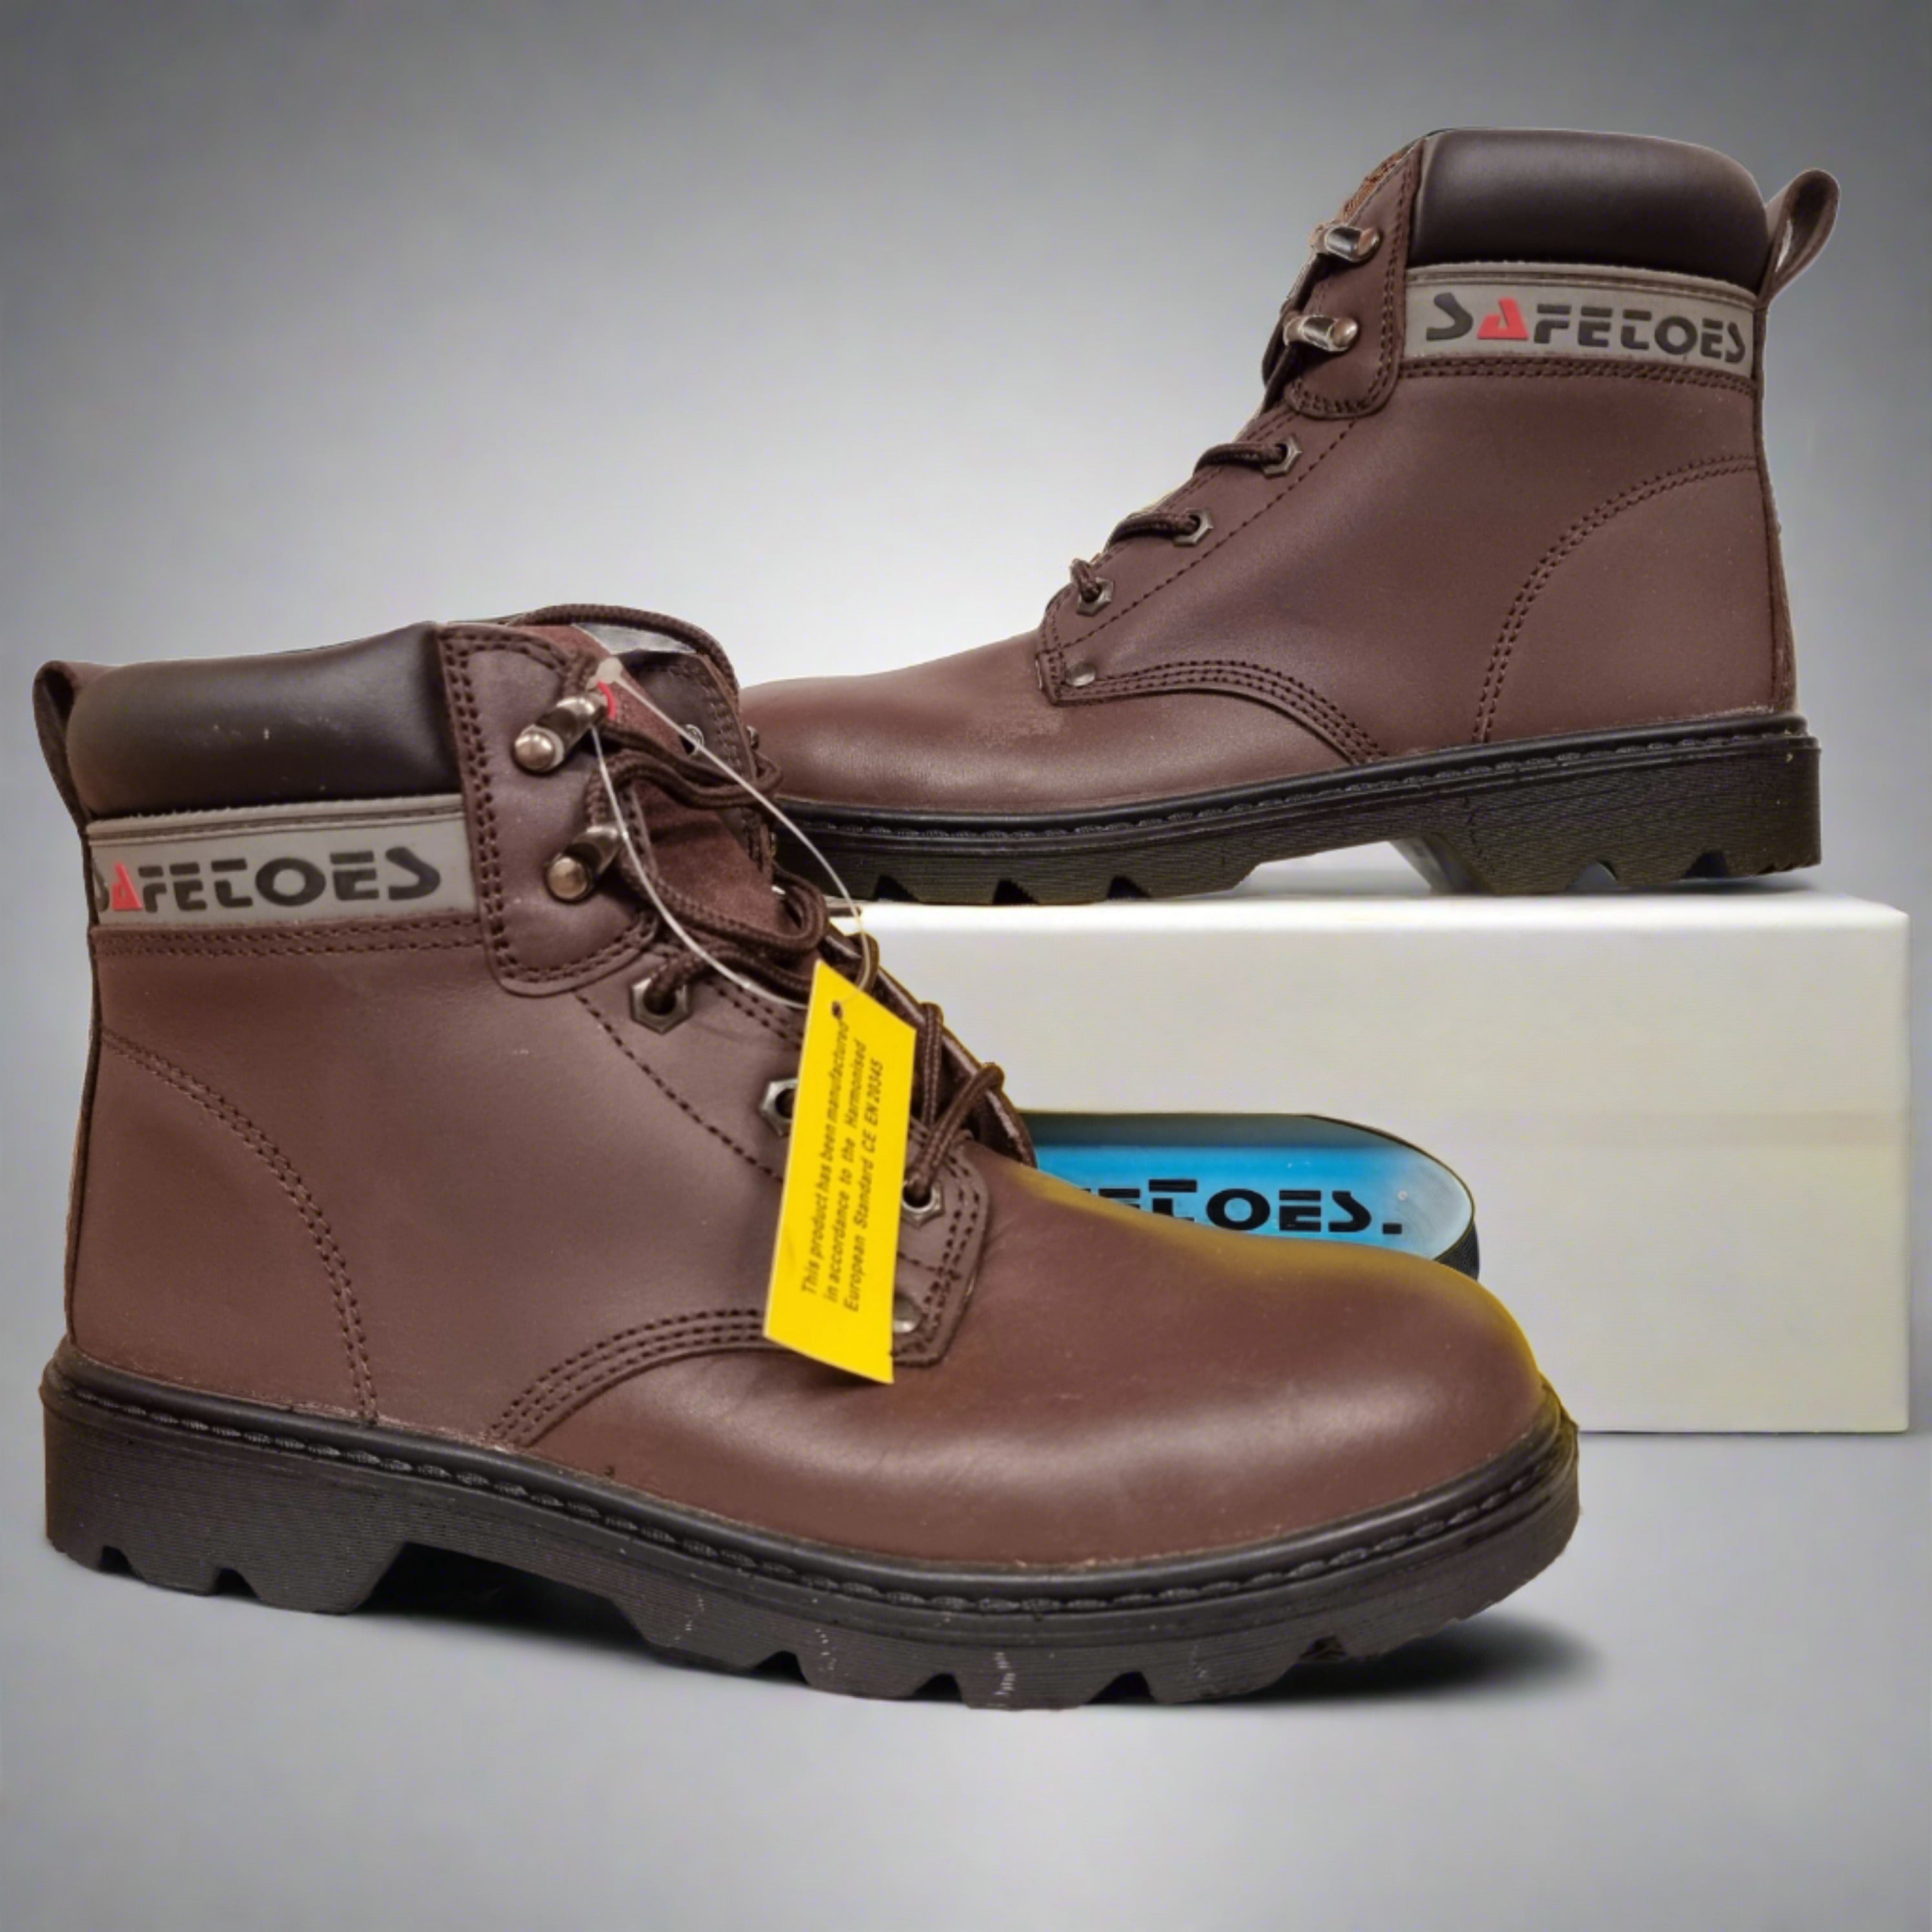 Safetoes S3002 Brown Leather Derby Safety Steel Toe Boots - UK Size 6